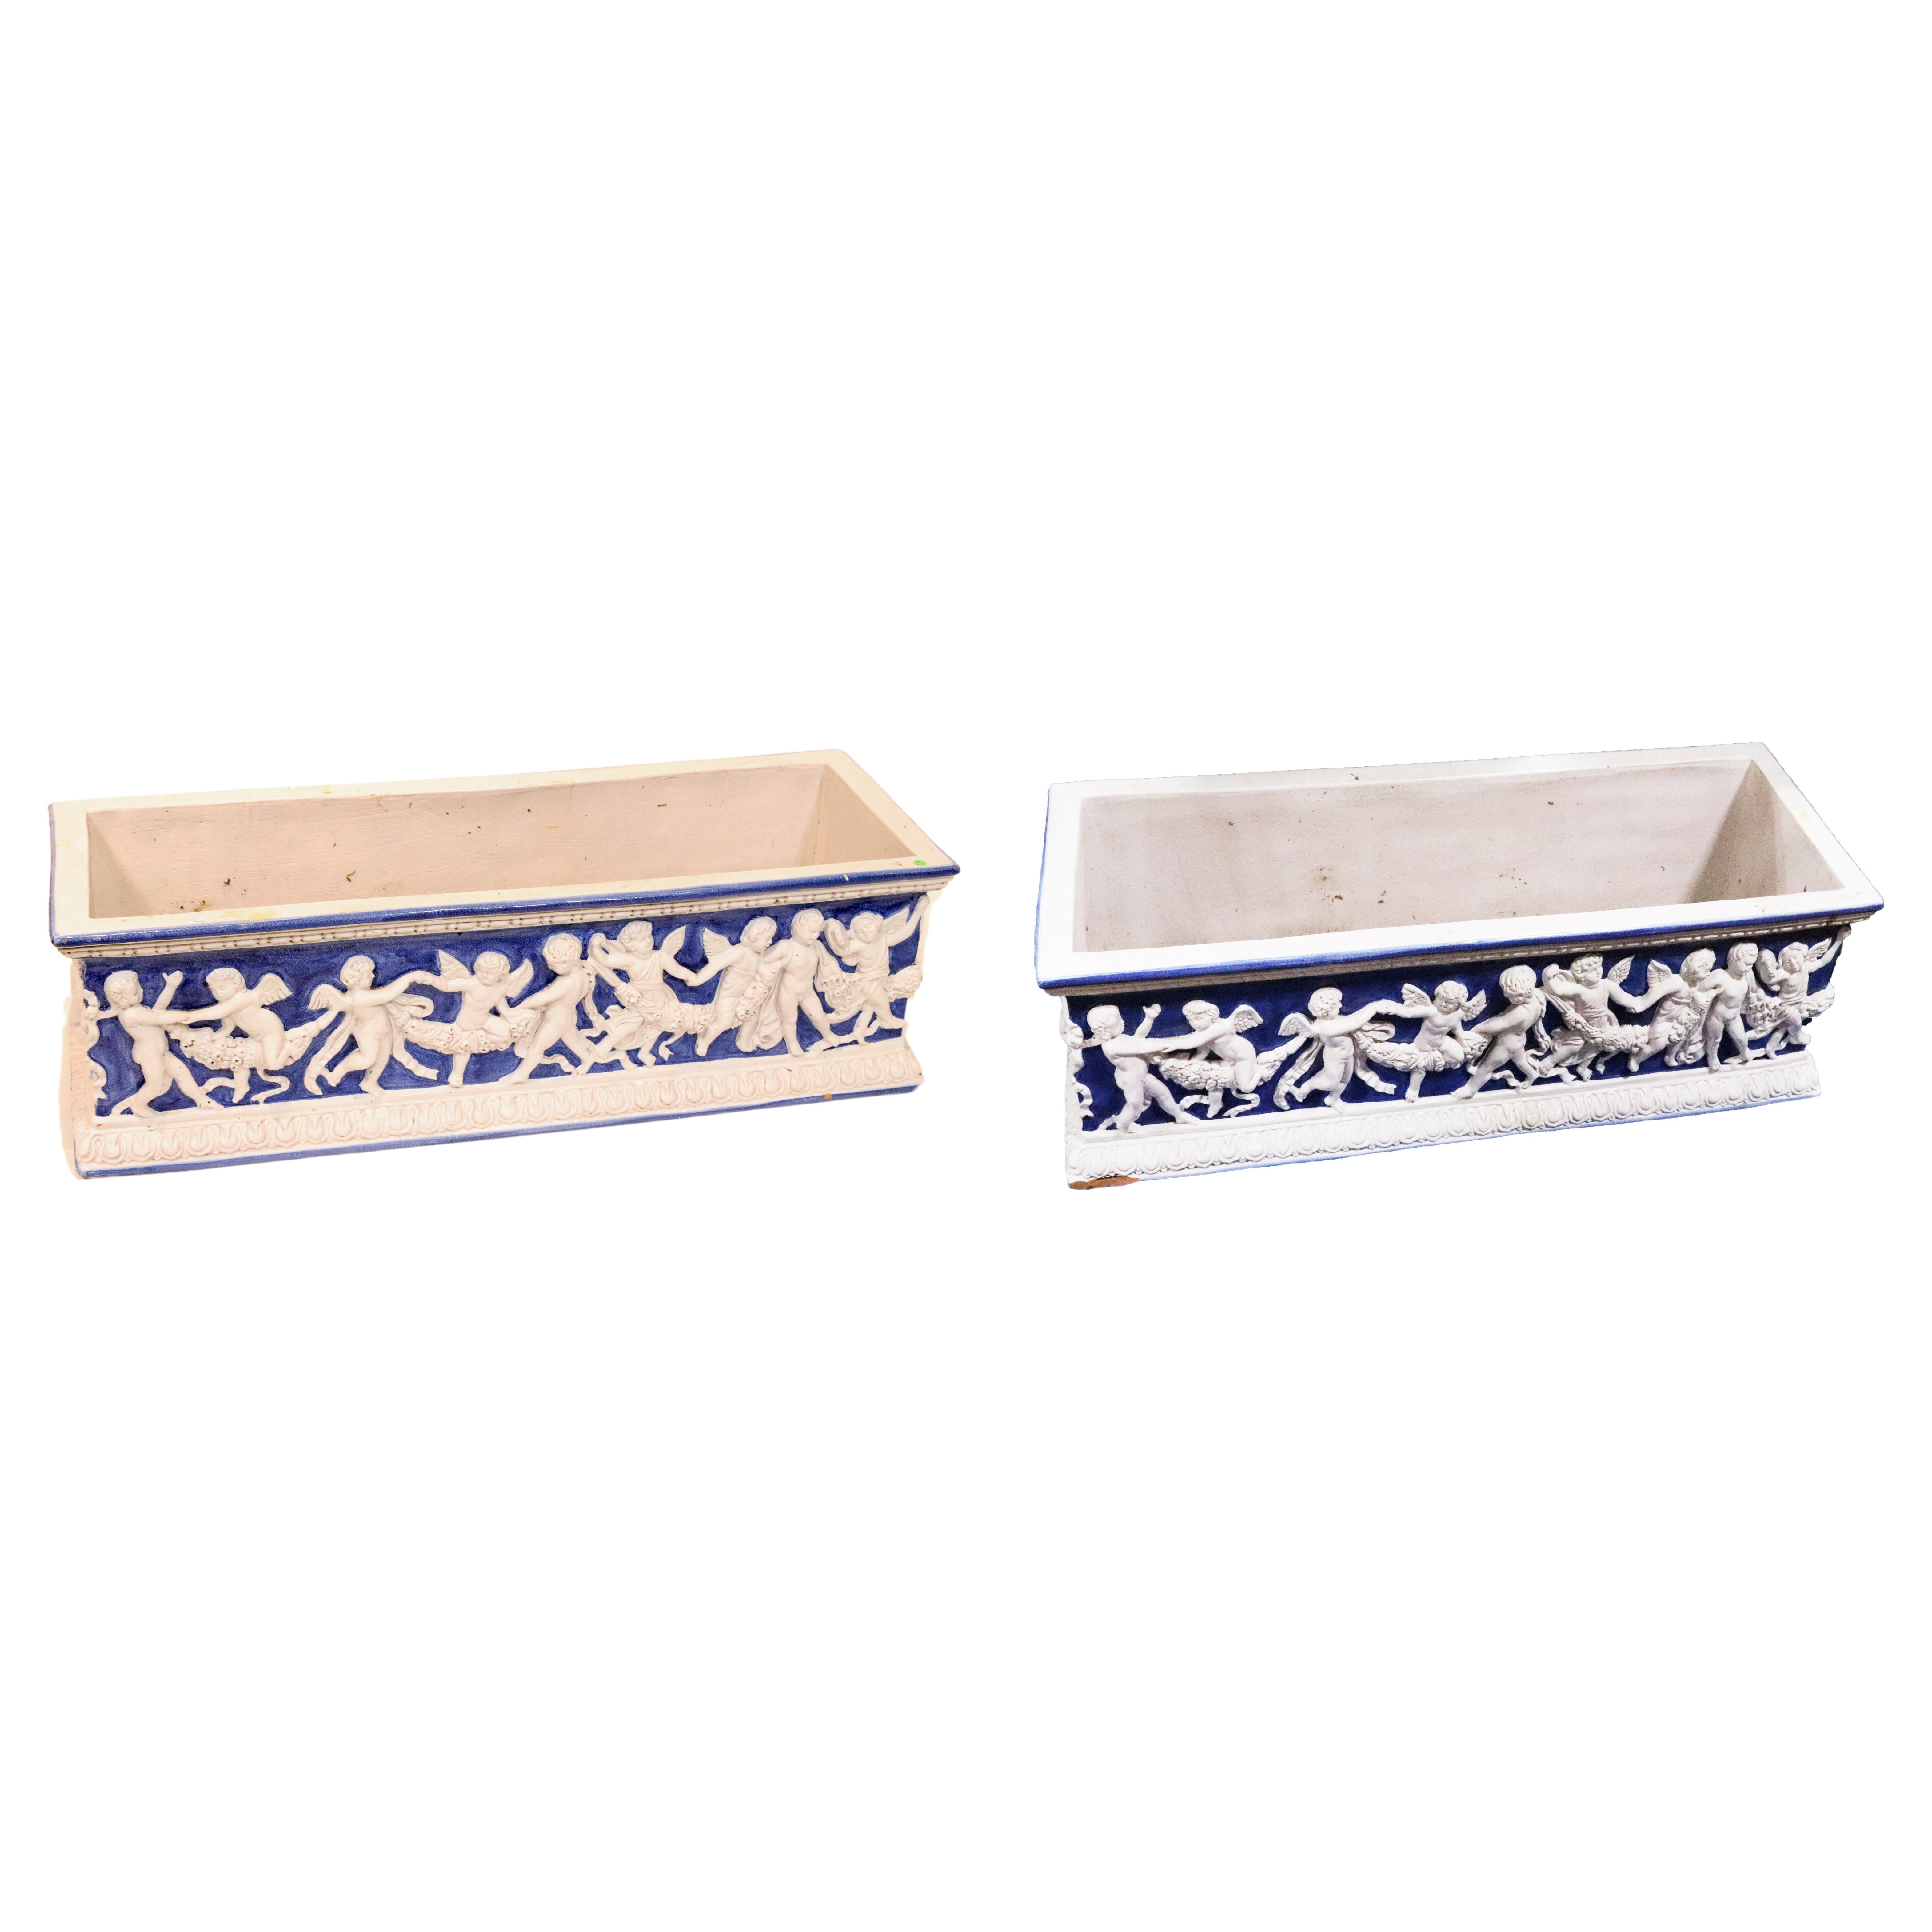 Pair of antique Majolica planters, in a large scale size in blue and white decorated with putti and draping garlands. These planters were part of a Gentleman's Majolica collection amassed over 40 years in Europe.  These Italian Majolica planters are